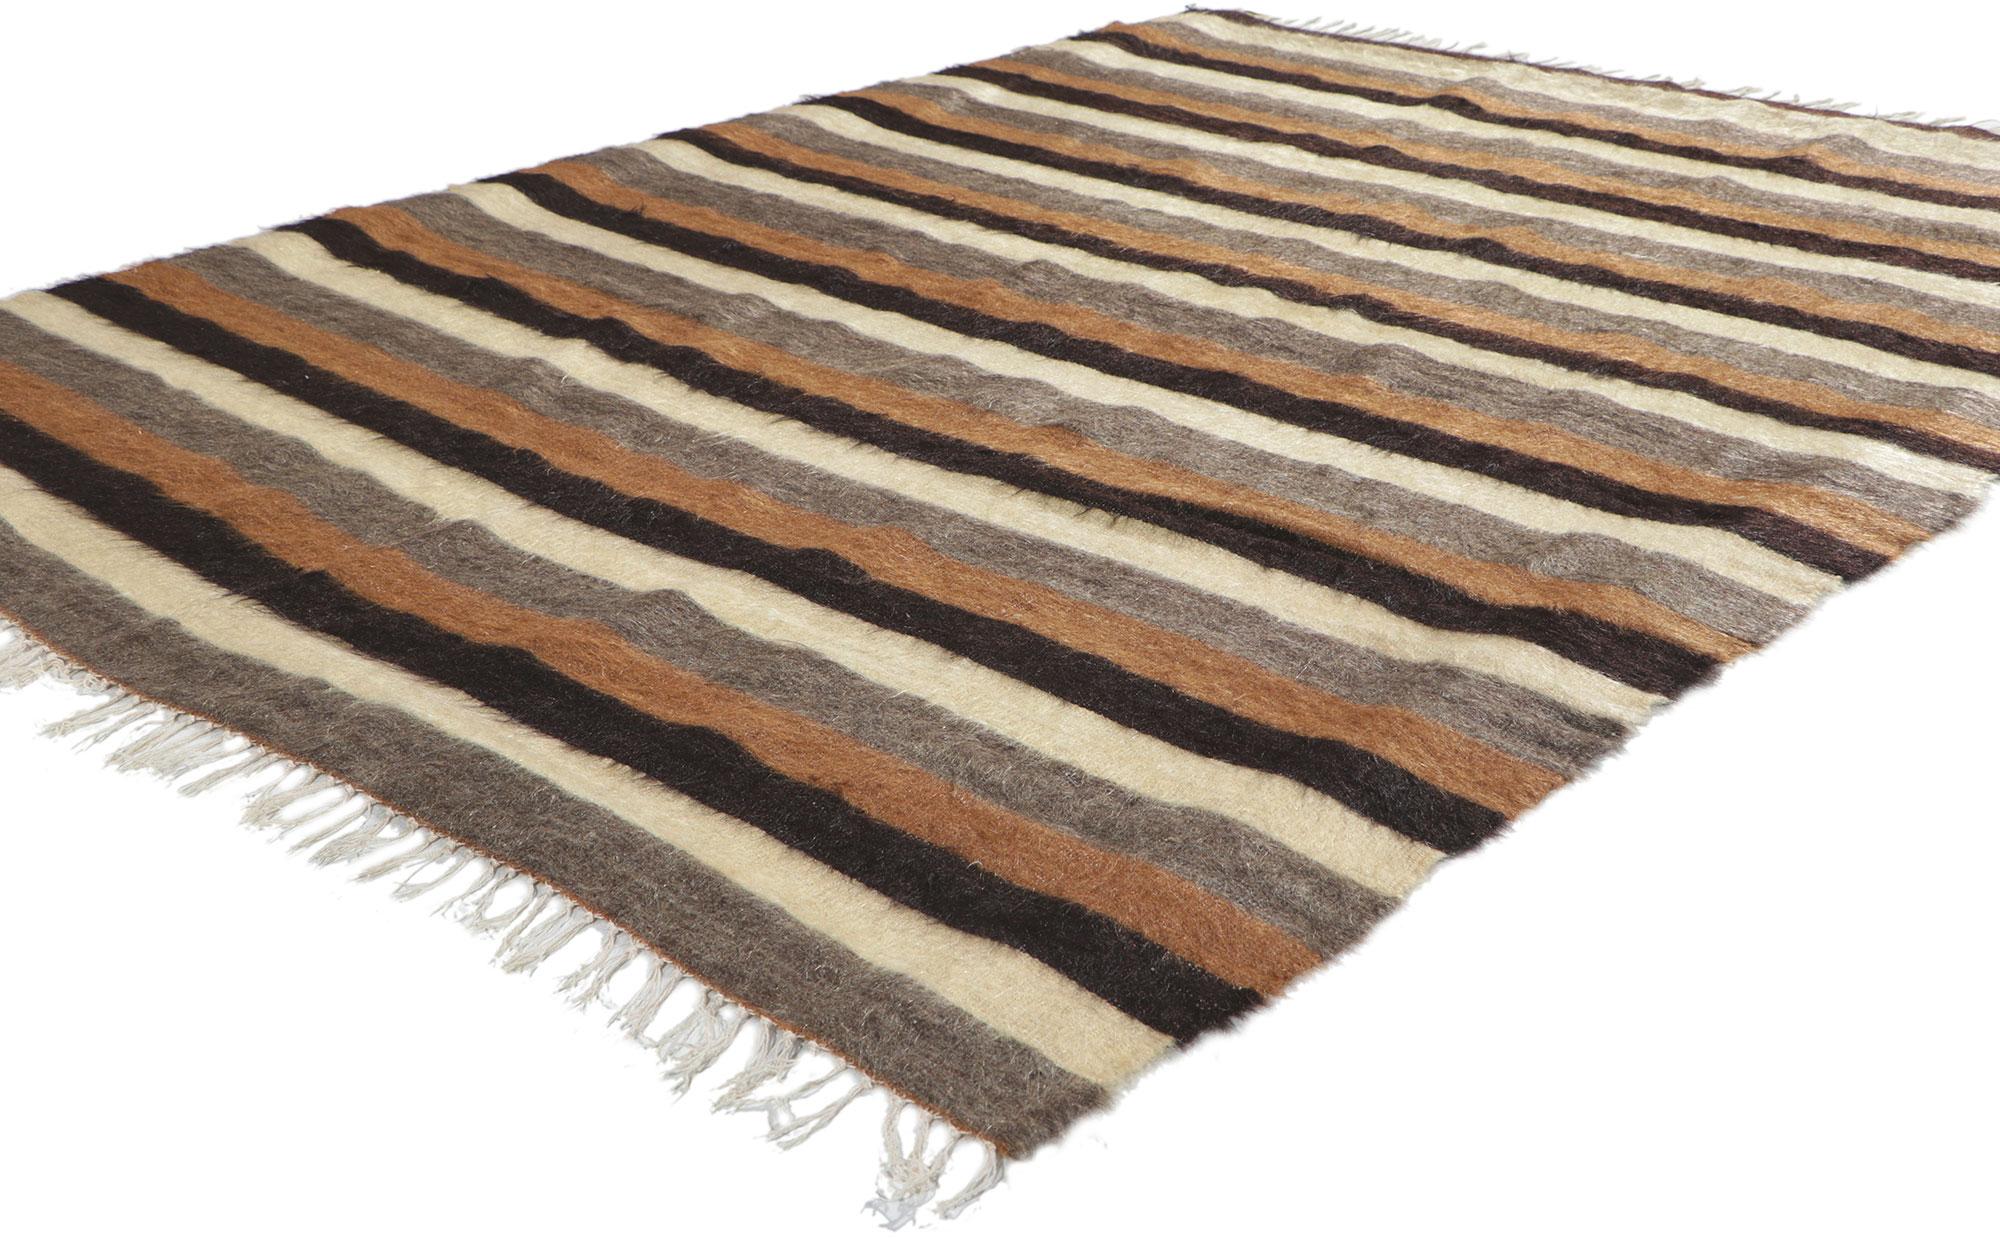 53831 Vintage Turkish Angora Wool Kilim Blanket Rug, 04'06 x 06'00. With its shaggy pile, incredible detail and texture, this handwoven Turkish angora kilim rug is a captivating vision of woven beauty. The eye-catching striped pattern and earthy